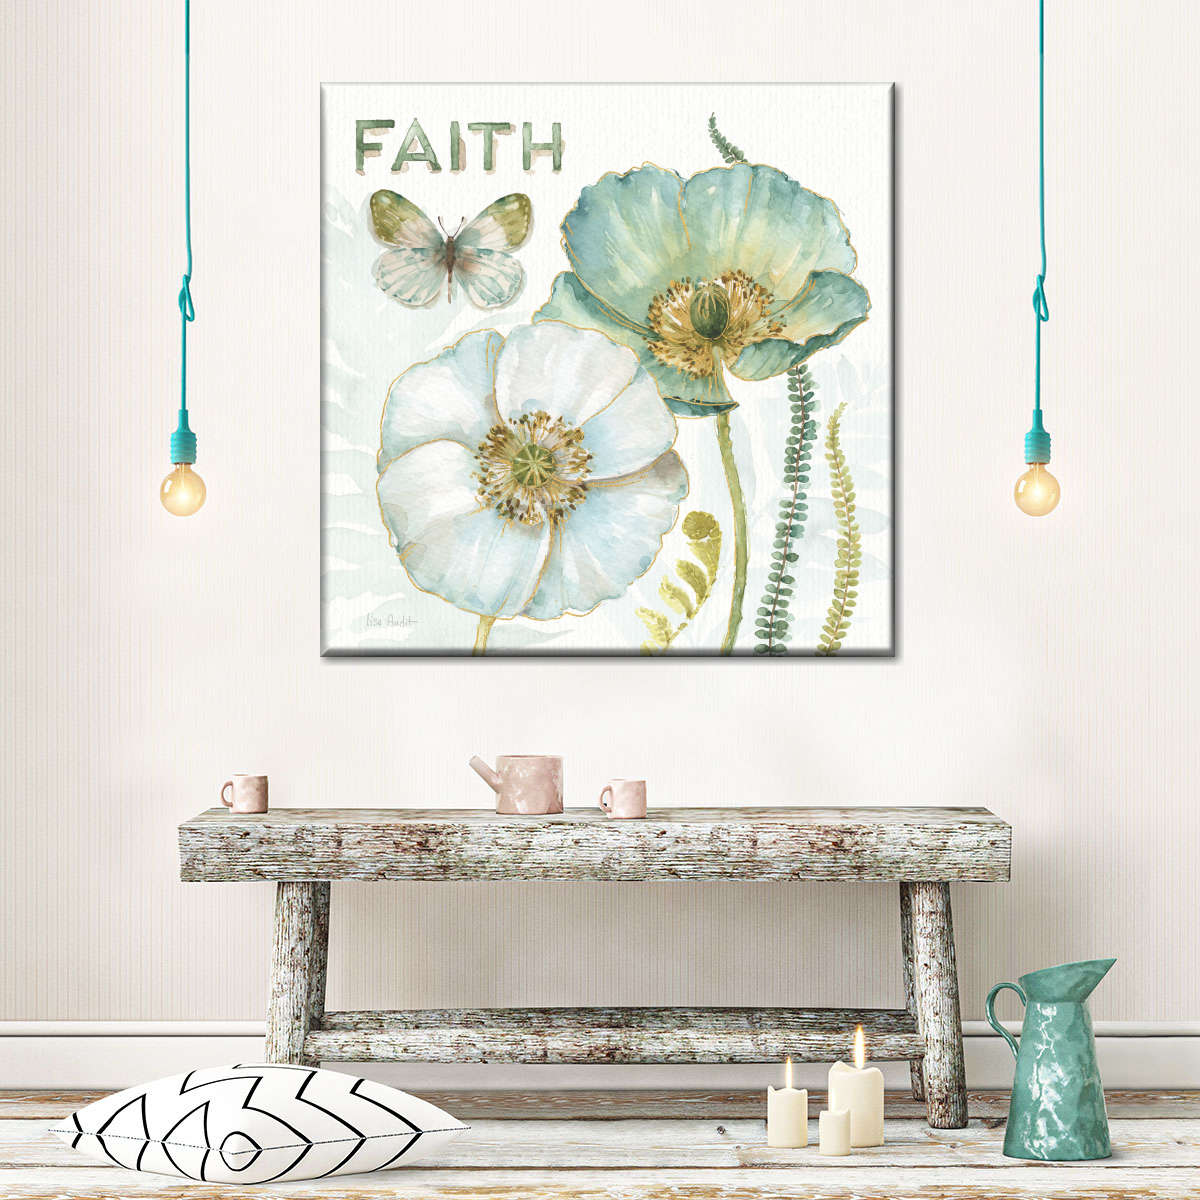 My Greenhouse Flowers Faith Square Canvas Art - Christian Wall Decor - Christian Wall Hanging